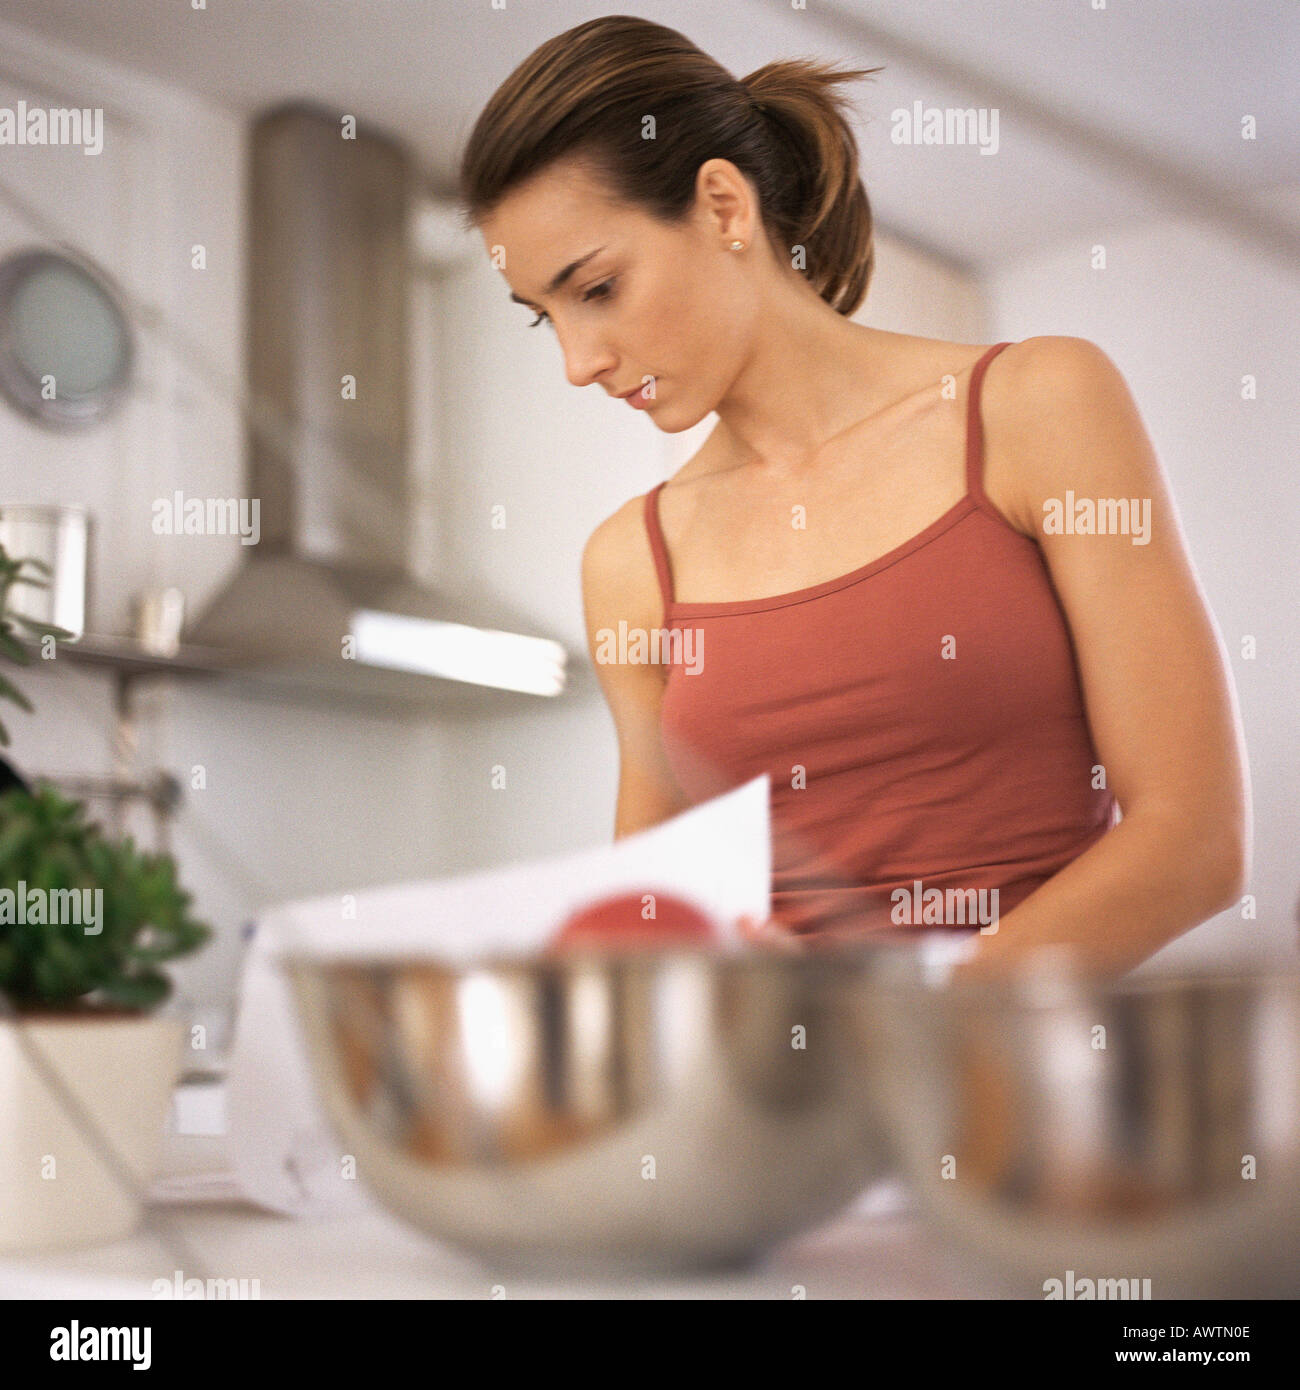 Woman working in kitchen, waist up, bowls on counter in foreground, blurred Stock Photo